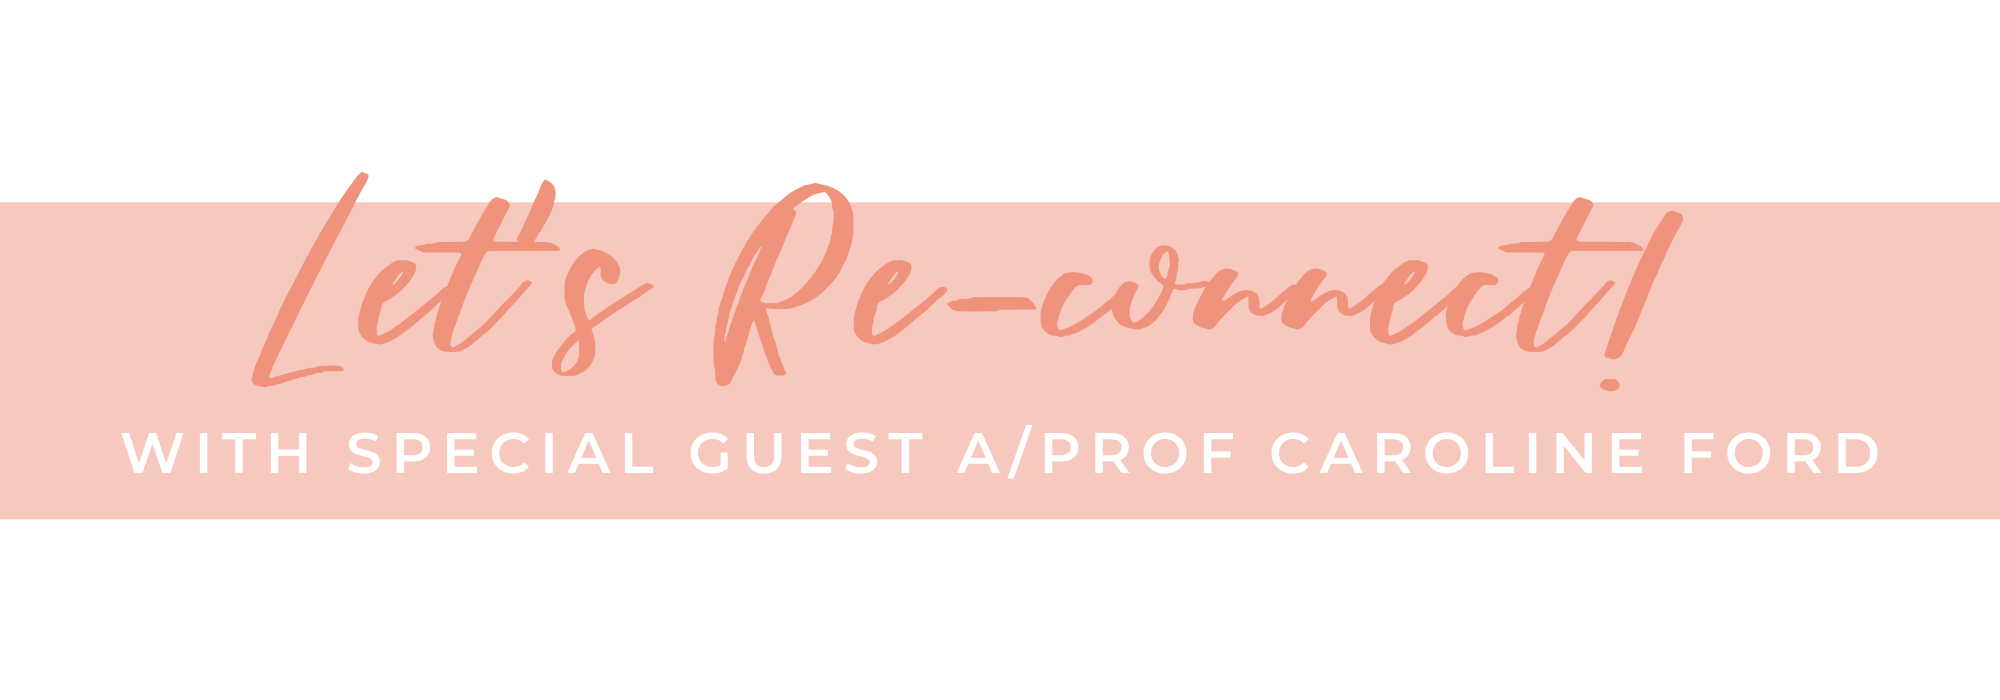 Let's Reconnect with special guest A/Prof Caroline Ford